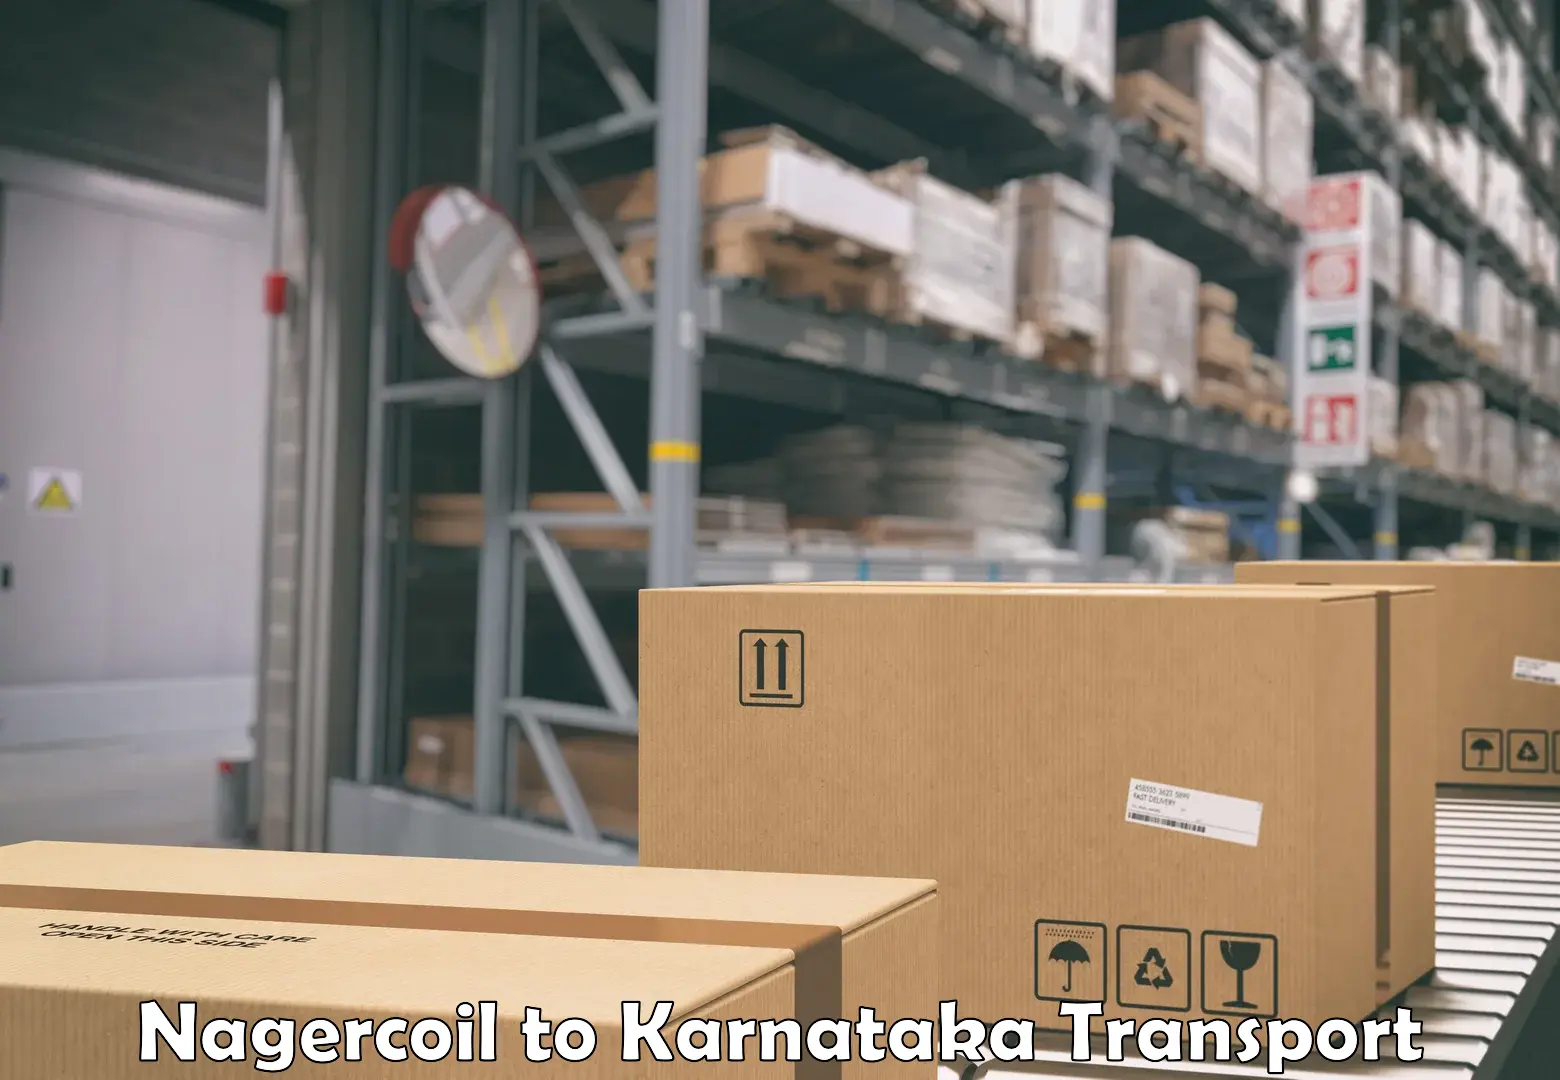 Road transport online services in Nagercoil to Karnataka